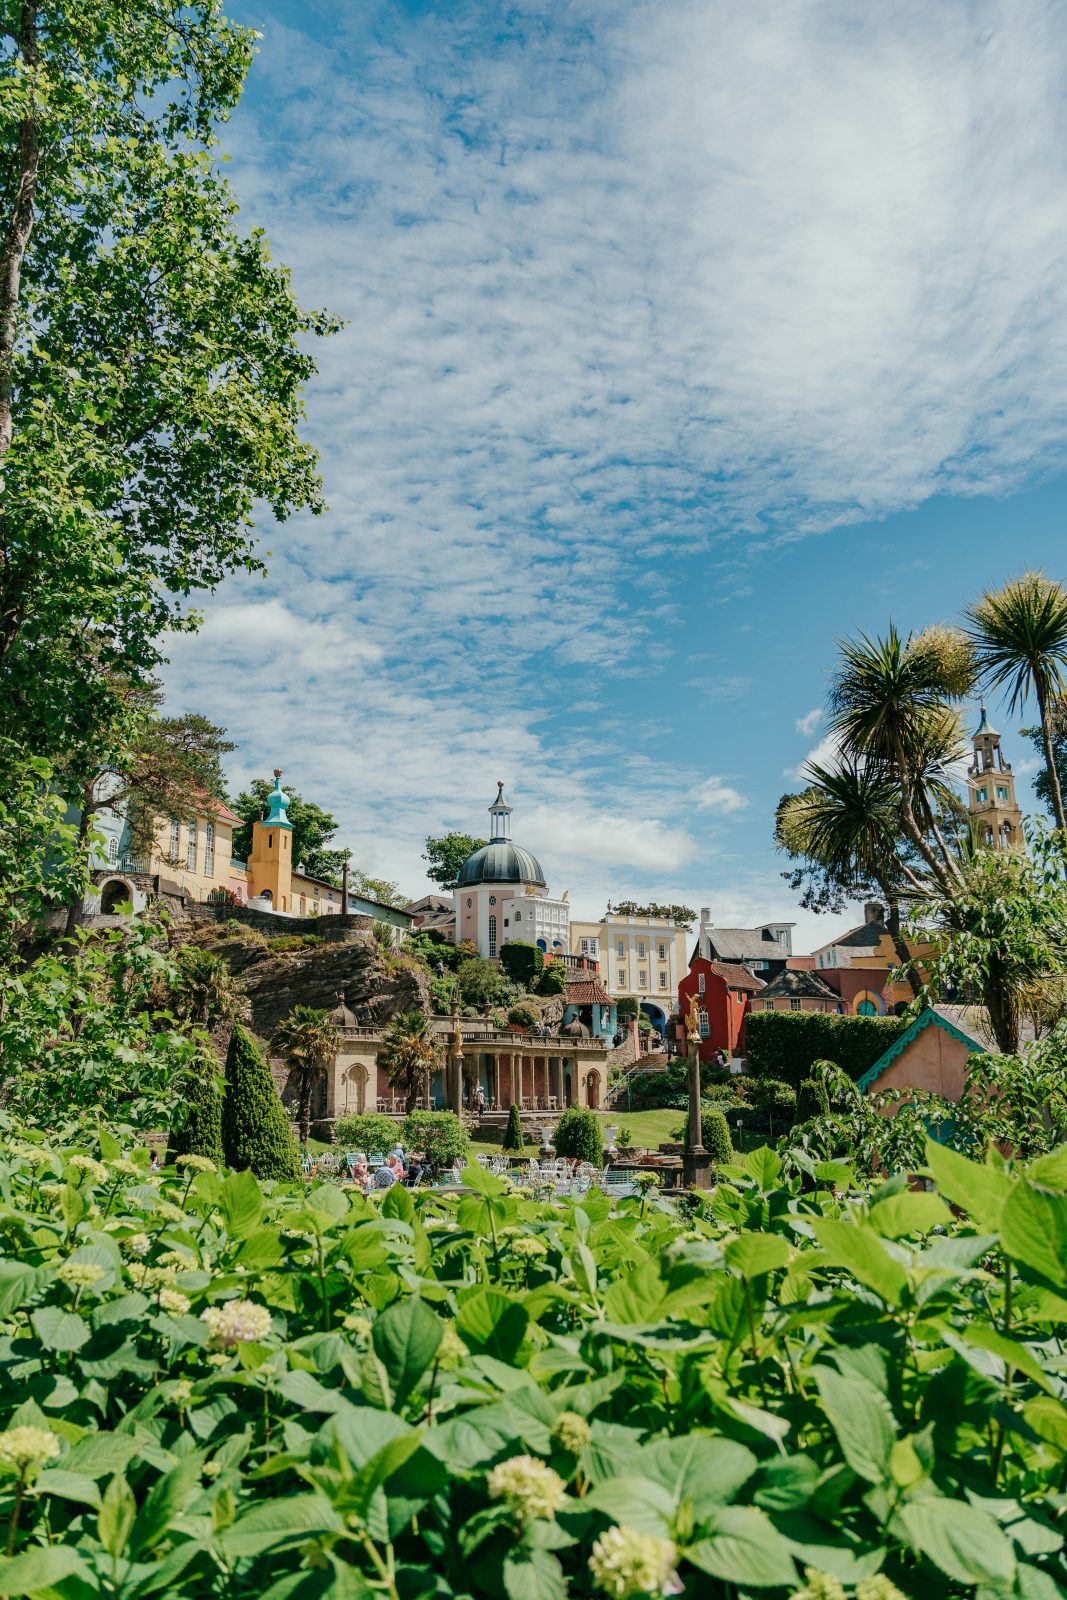 Portmeirion village in North Wales has been named one of the most beautiful places in the UK. Credit: Unsplash @shawnaggg